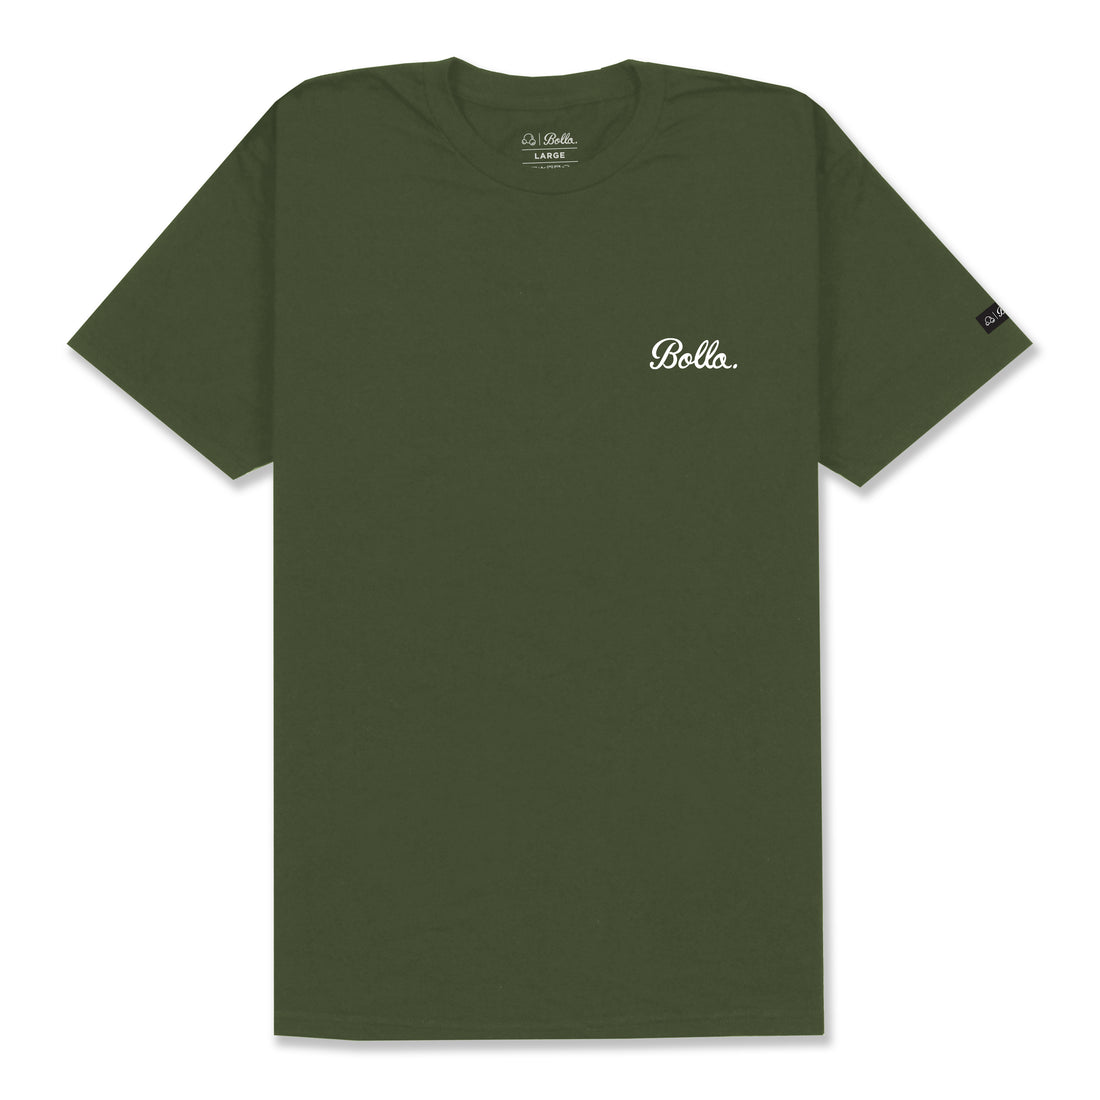 WELCOME T-SHIRT - OLIVE